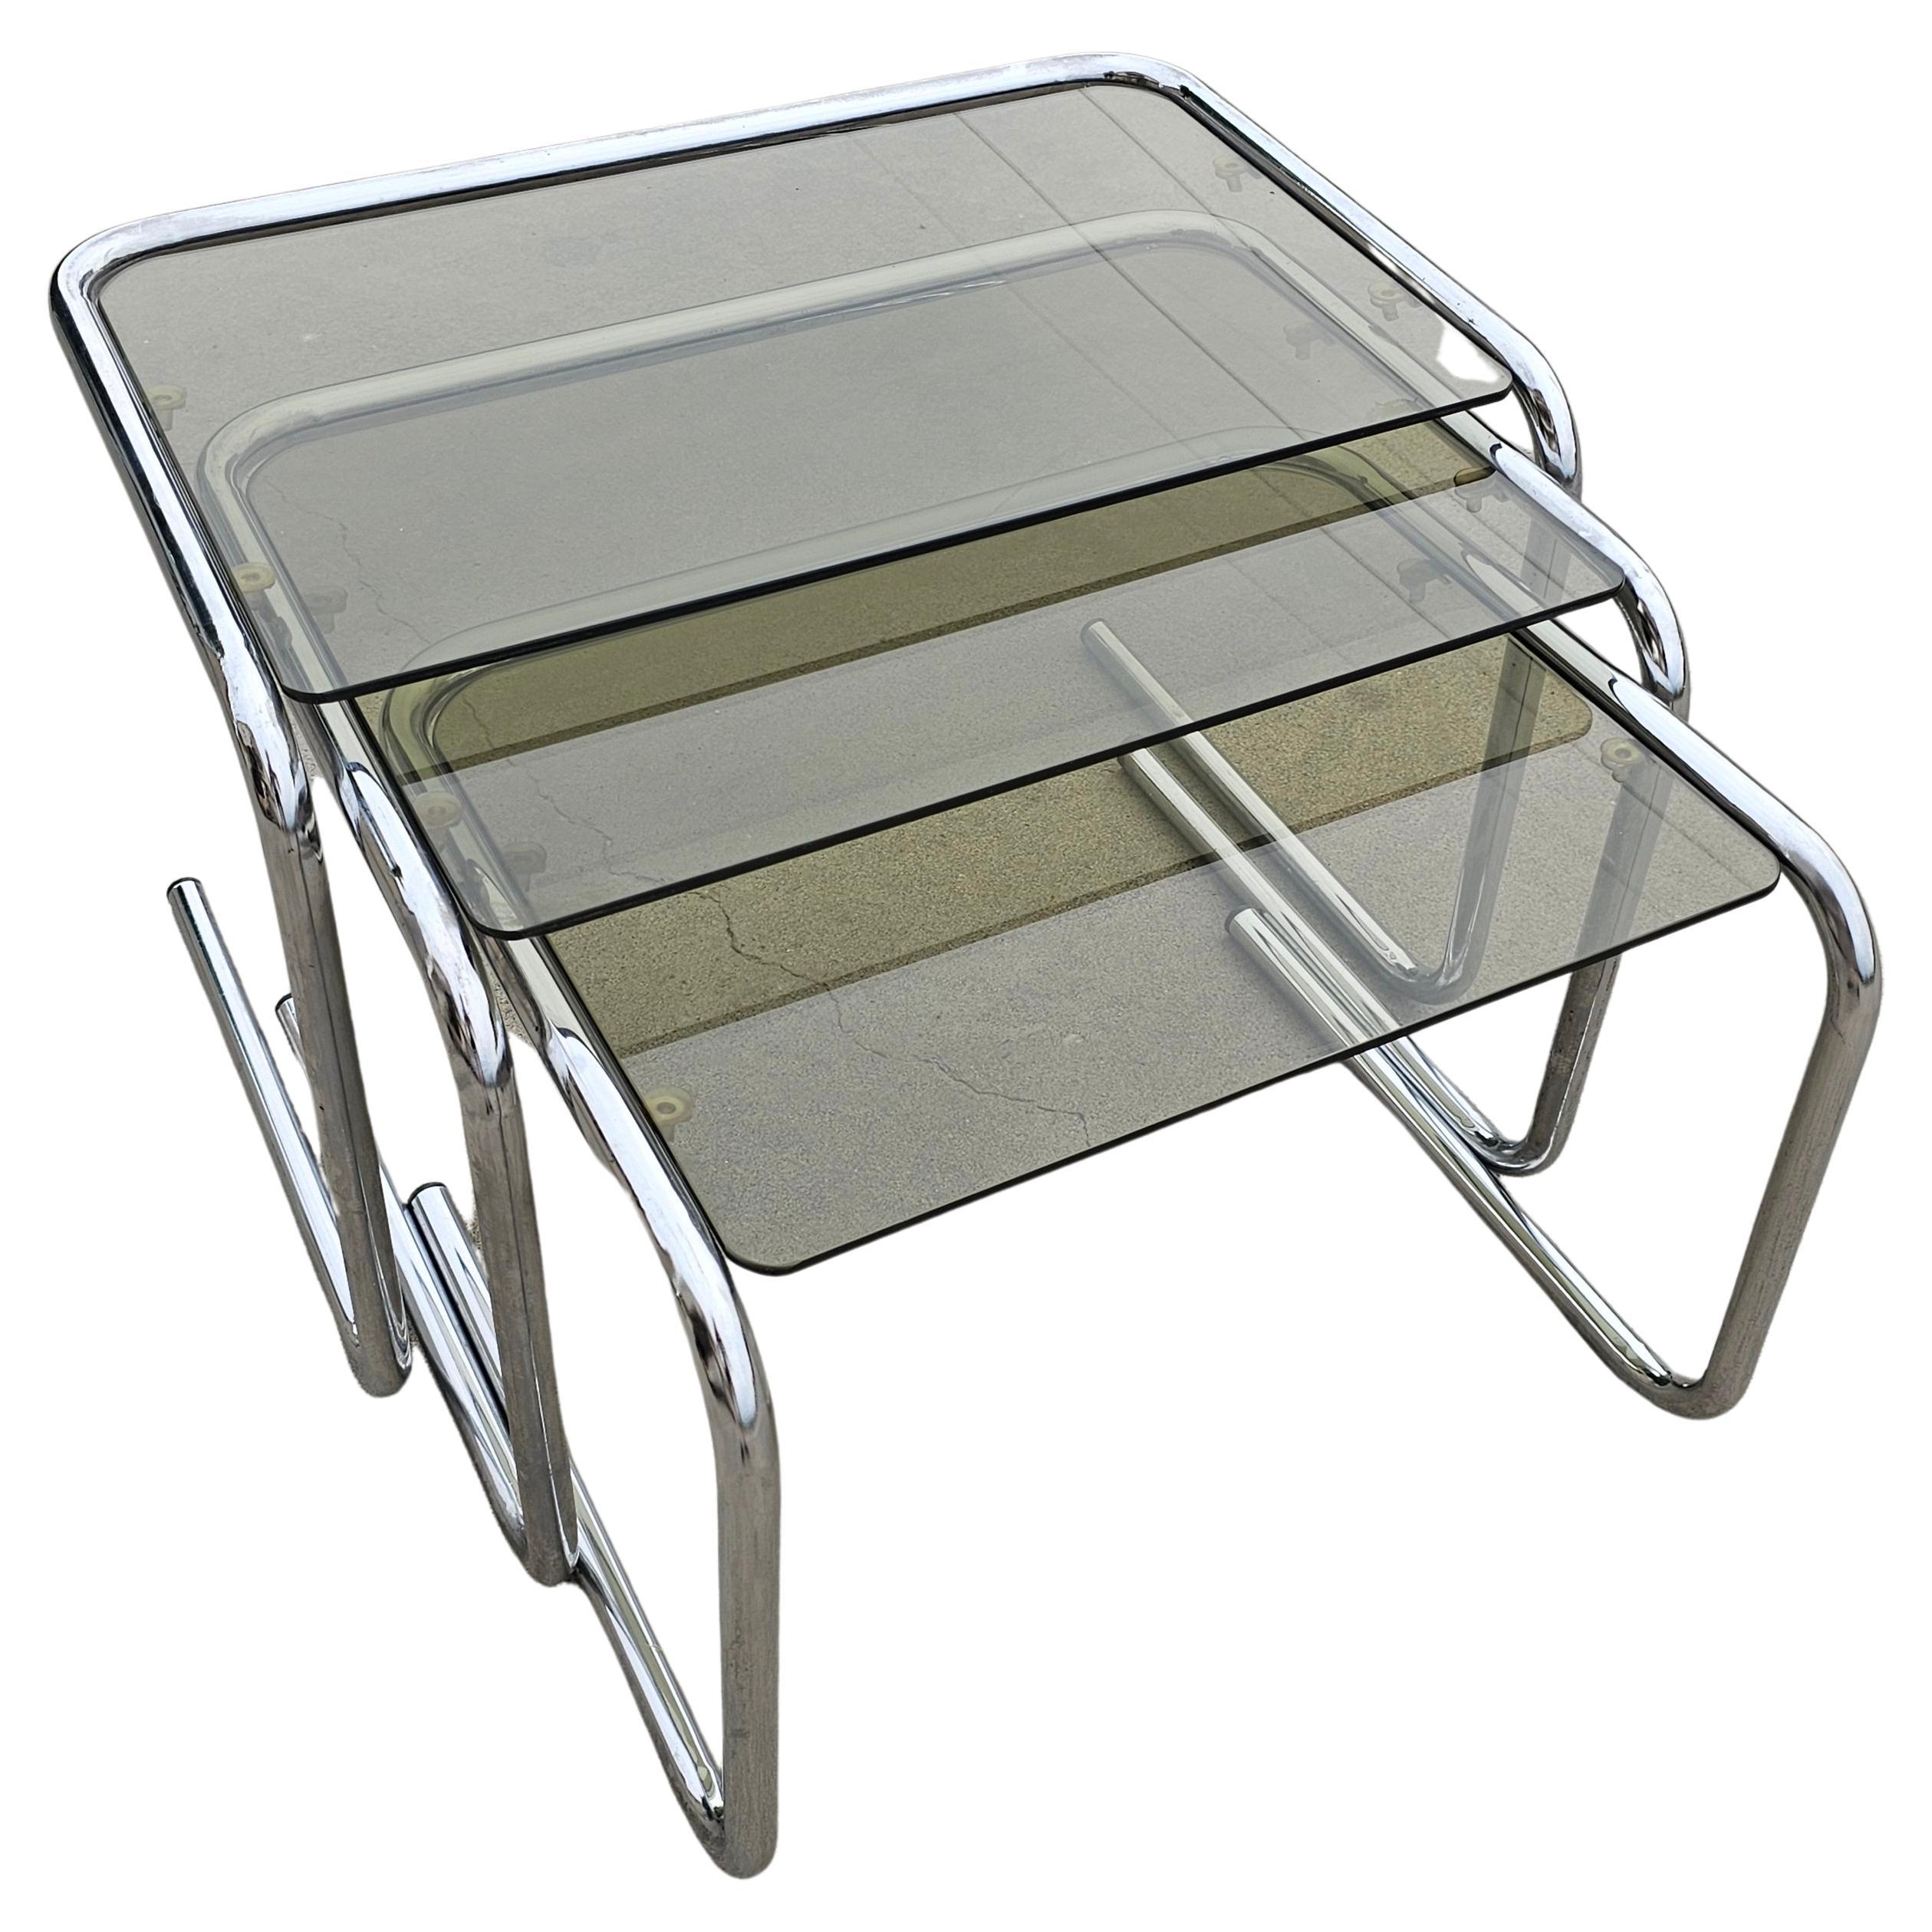 Milo Baughman style Chrome and Smoked Glass Nesting Tables, Italy 1970s For Sale